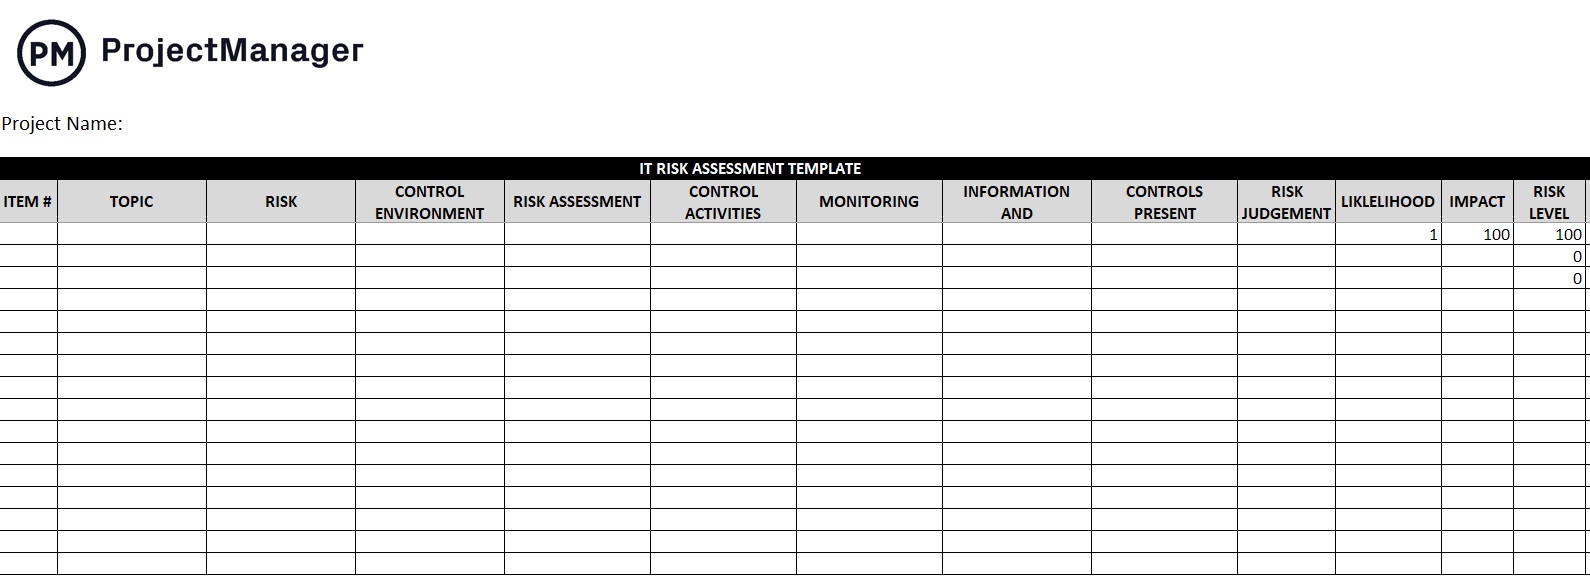 ProjectManager's IT risk assessment template